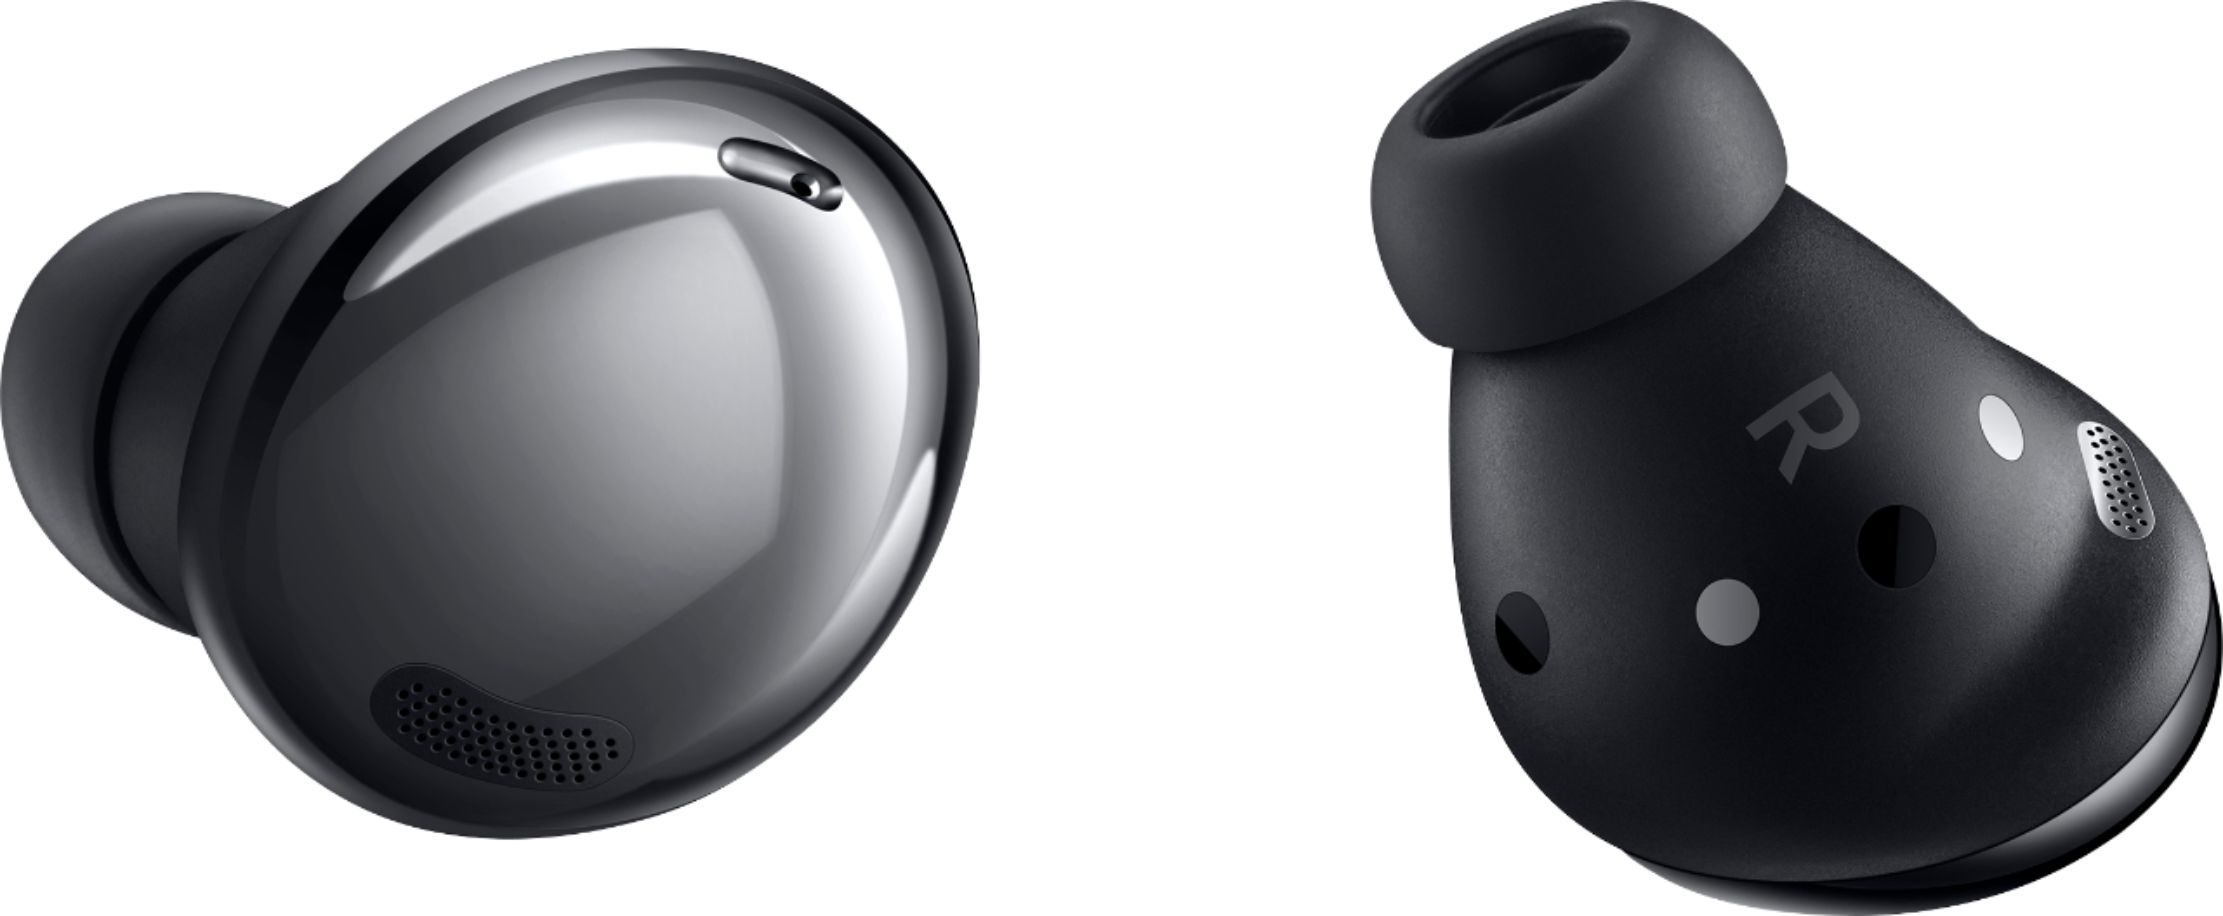 $50 off for the galaxy buds pro on Best Buy $149.99